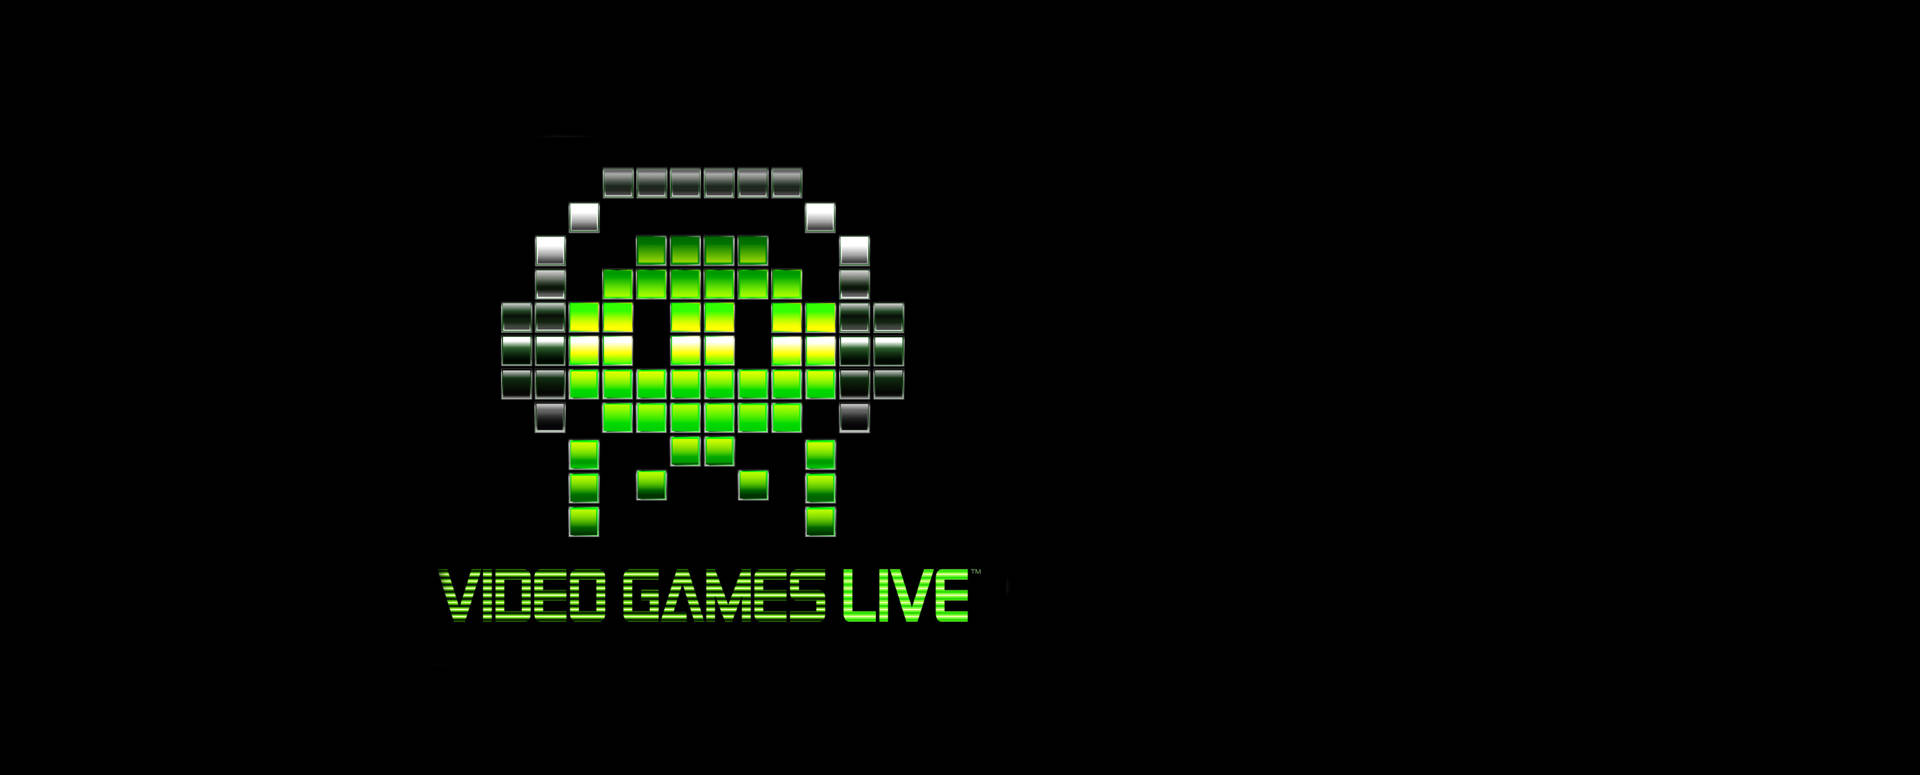 Video Games Live  